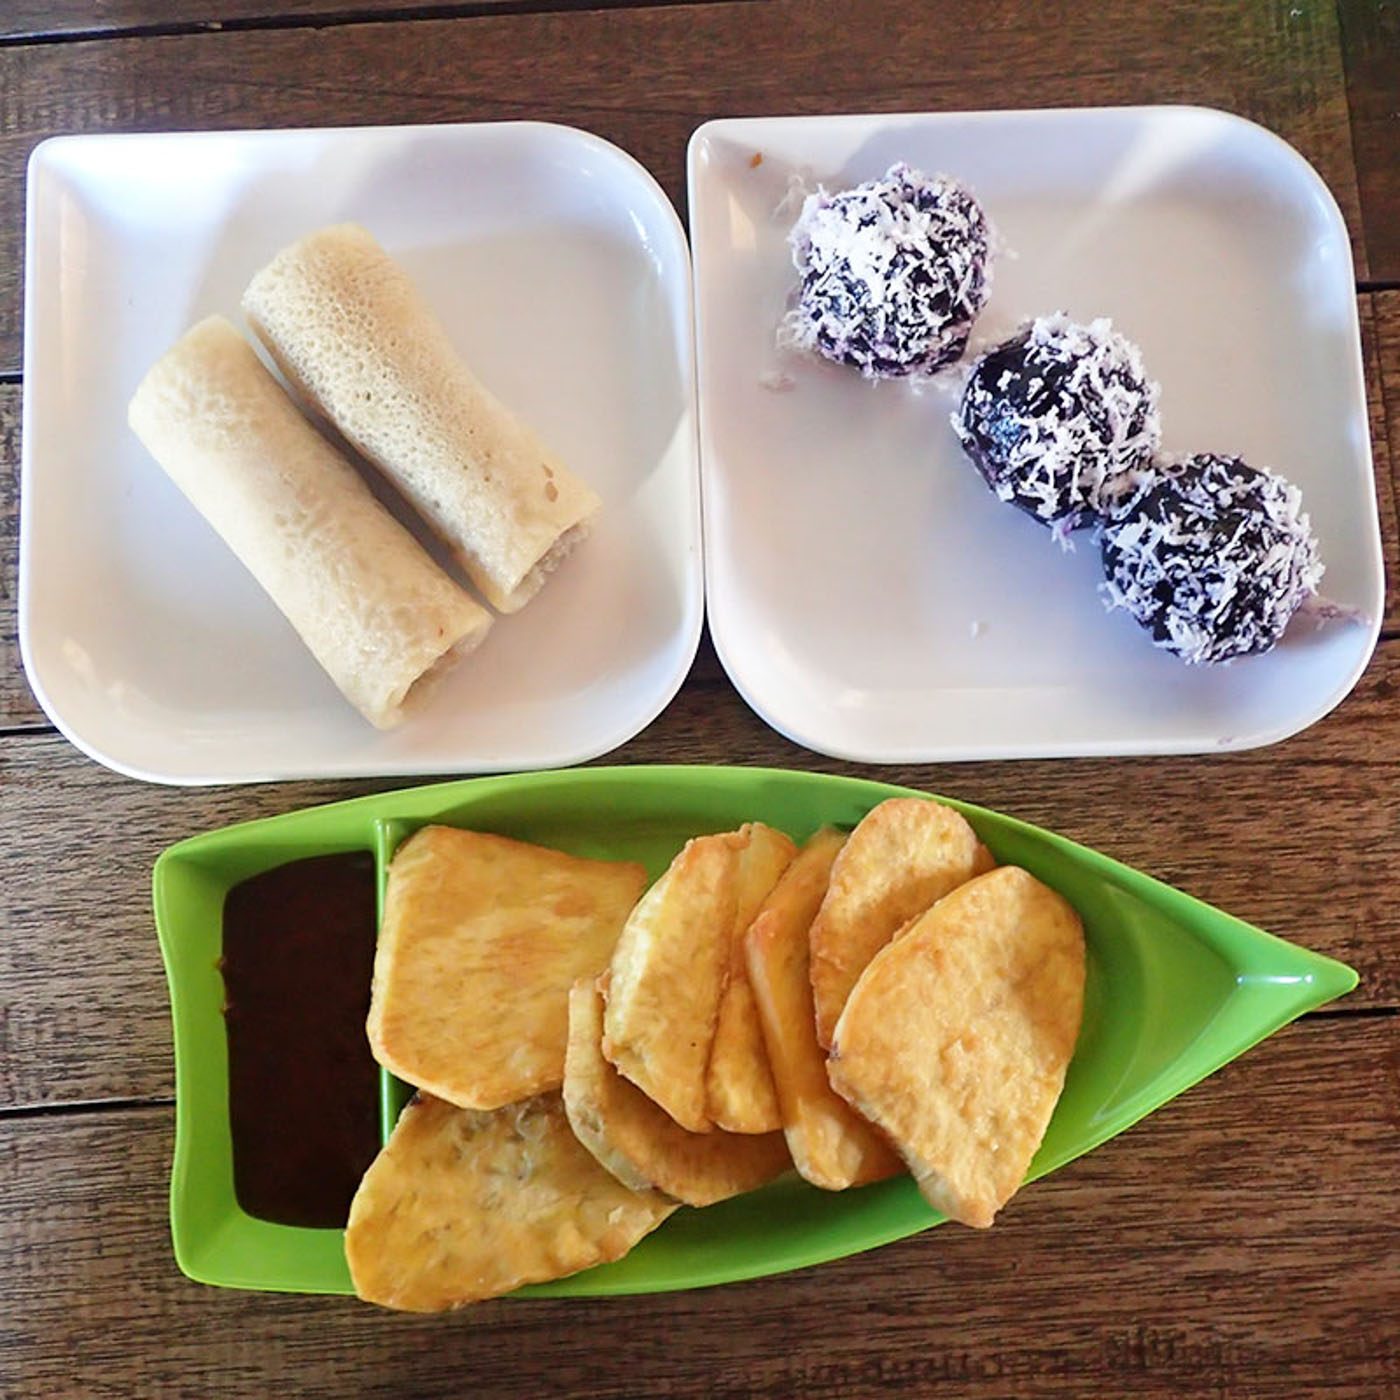 DAILY TREATS. The bangbang usually has fried bananas or sweet potatoes, as well as other sweets made from rice flour or wheat flour. Pictured are some of the common bangbang items.
 